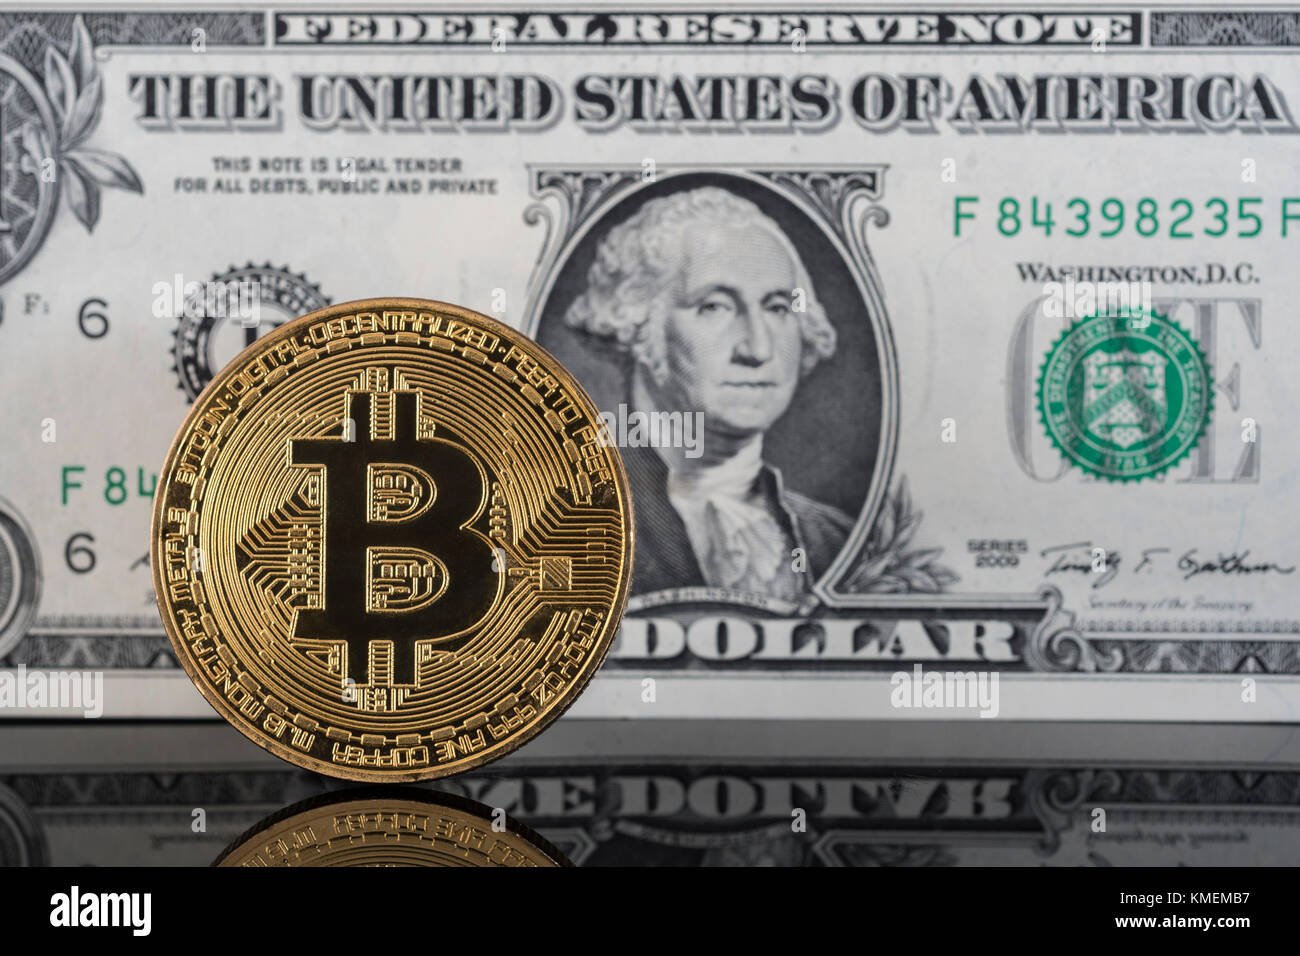 Gold-colored Bitcoin cryptocurrency with US $1 bills / banknotes - Bitcoin values reaching high levels in December 2017, 2020 Bitcoin crash. Stock Photo